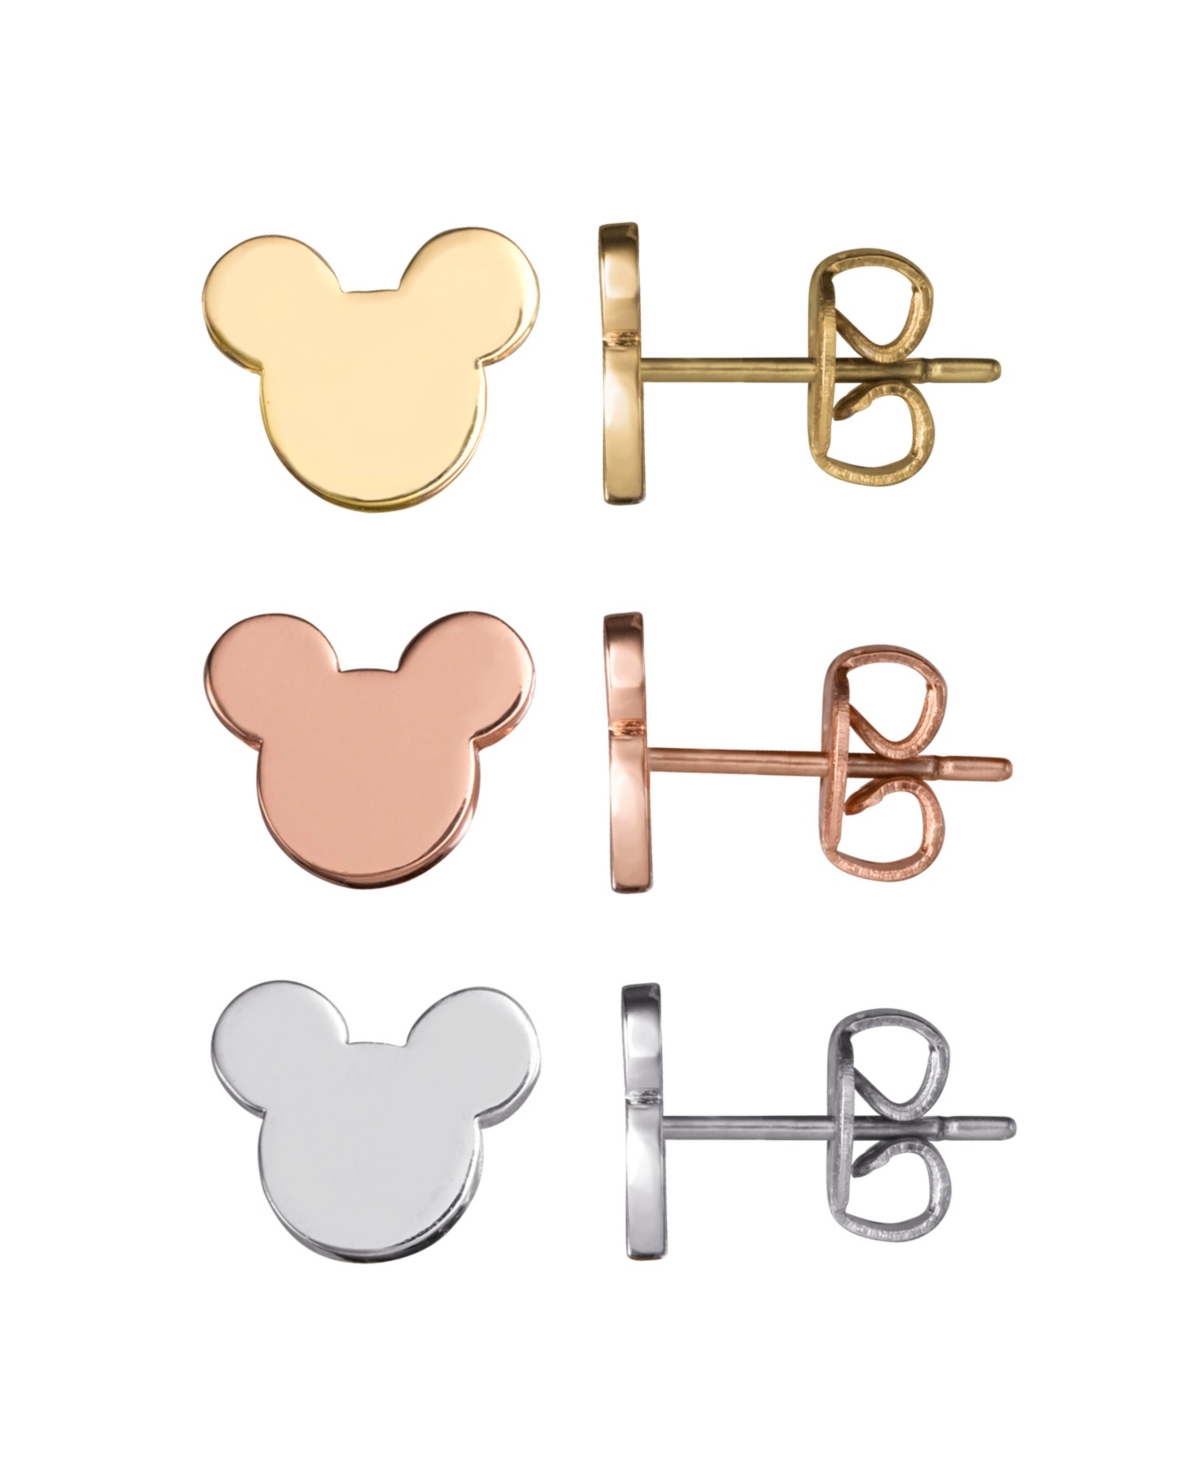 Mickey Mouse Plated Stud Earrings Set, Tri-color - 3 Pairs - Gold, silver, pink tone